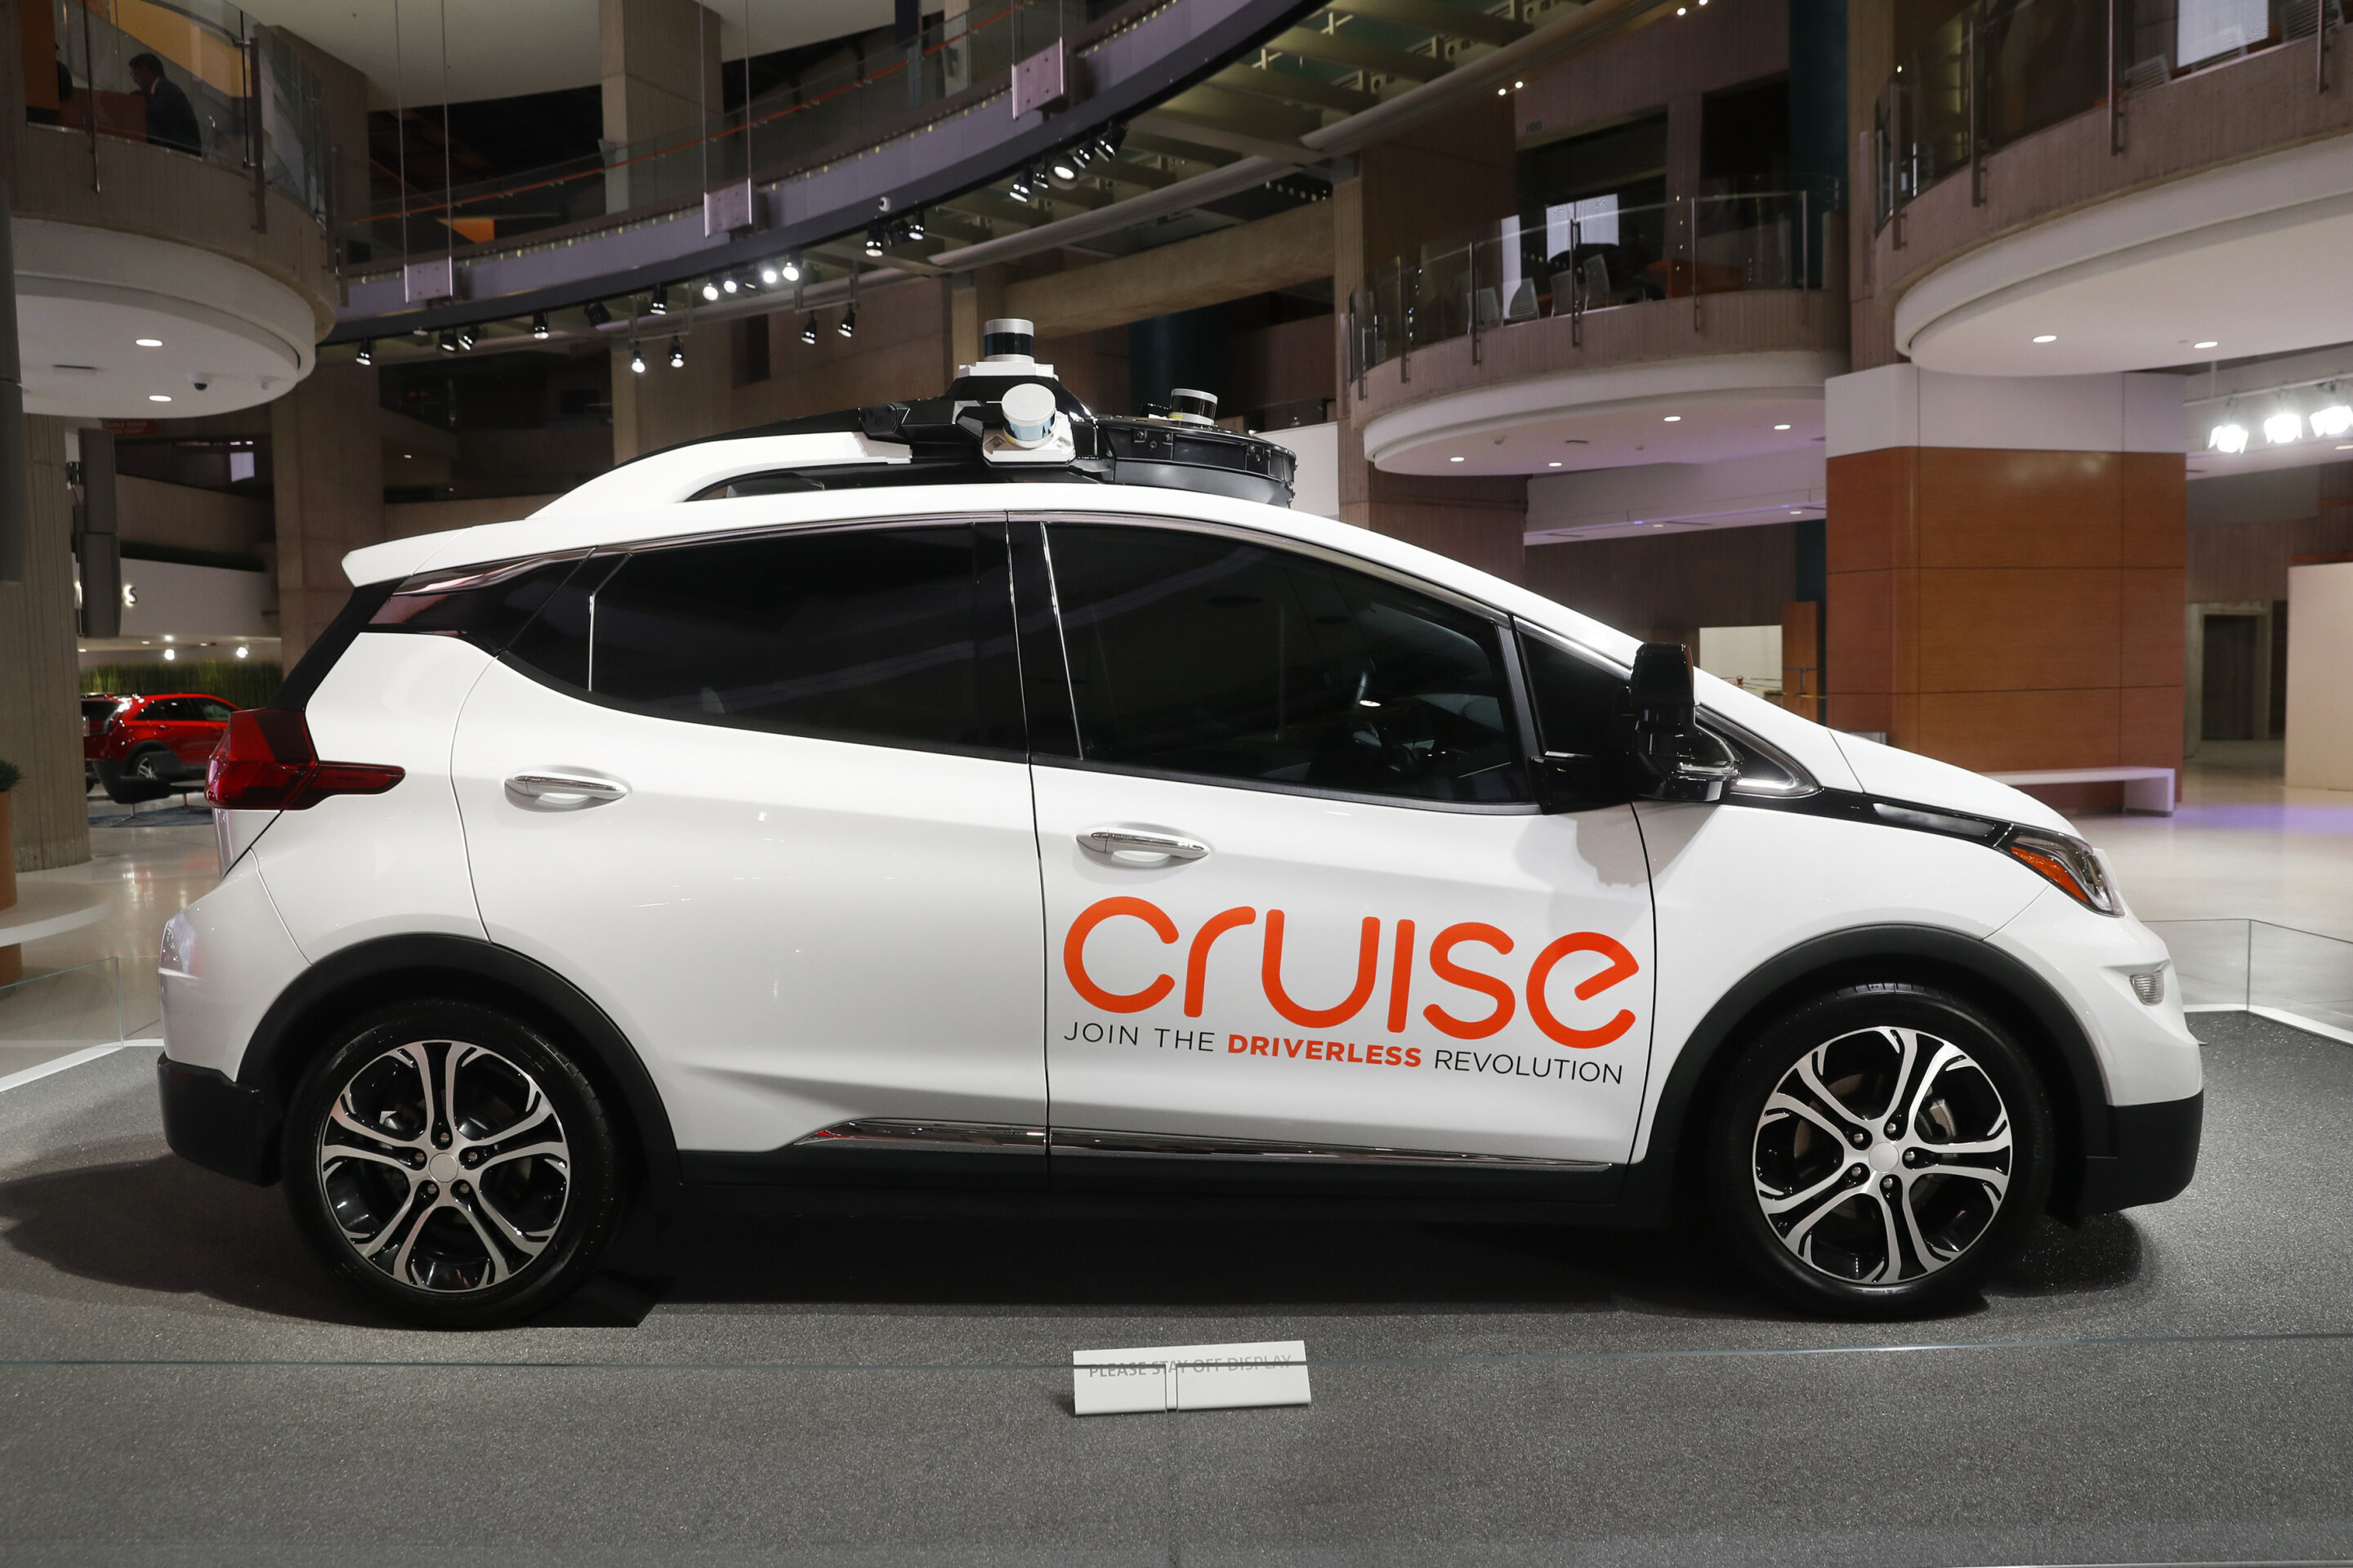 Cruise wants to test self-driving cars all over California